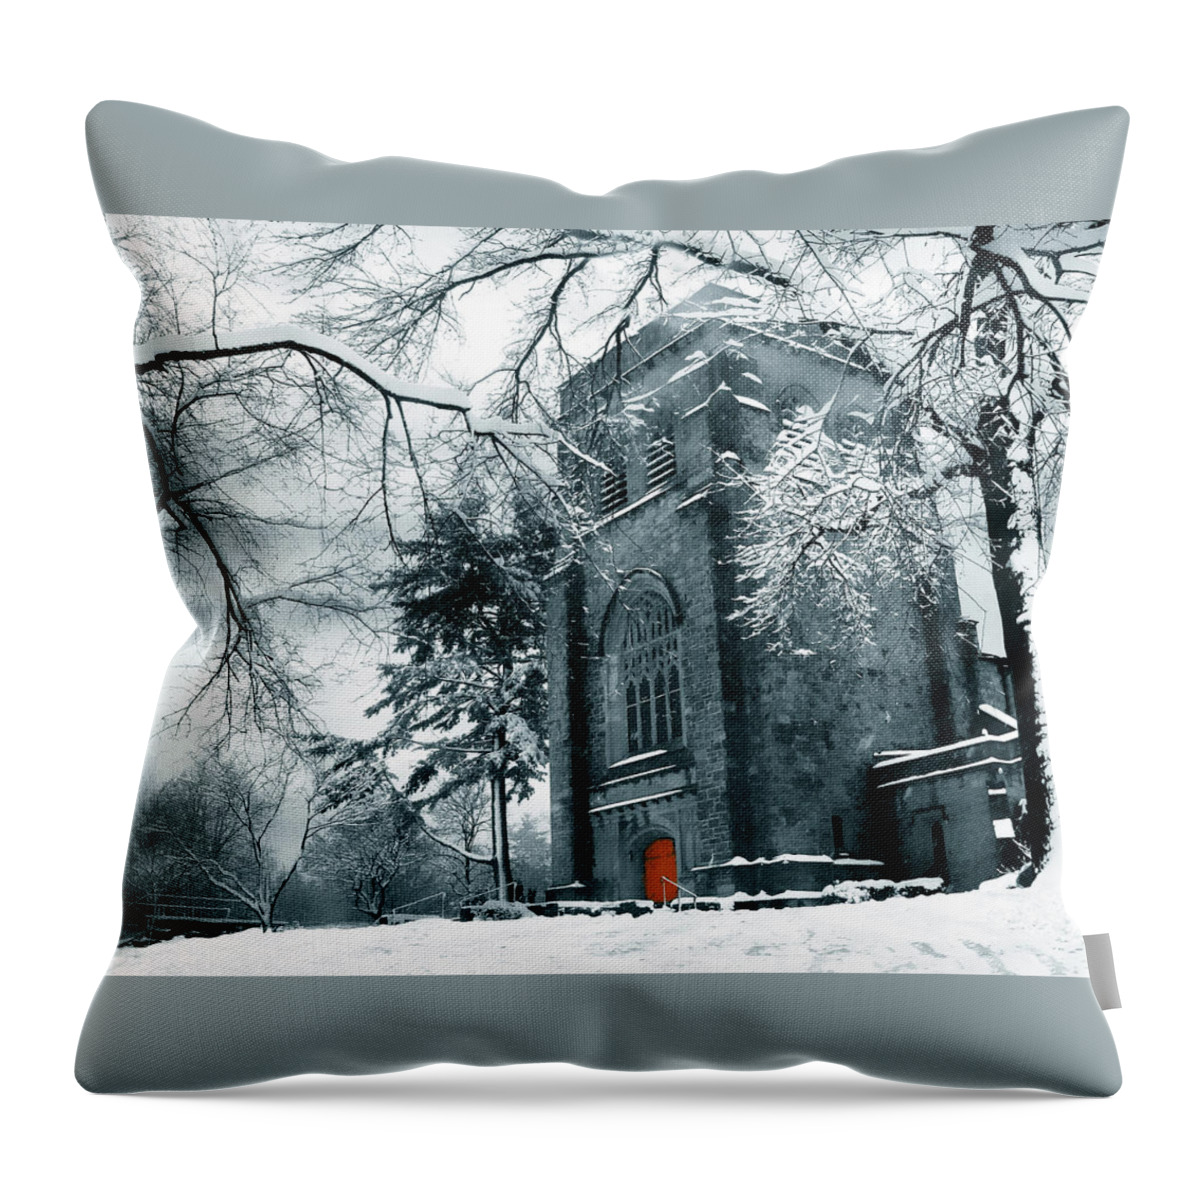 Black Throw Pillow featuring the photograph Winter's Gothic by Jessica Jenney